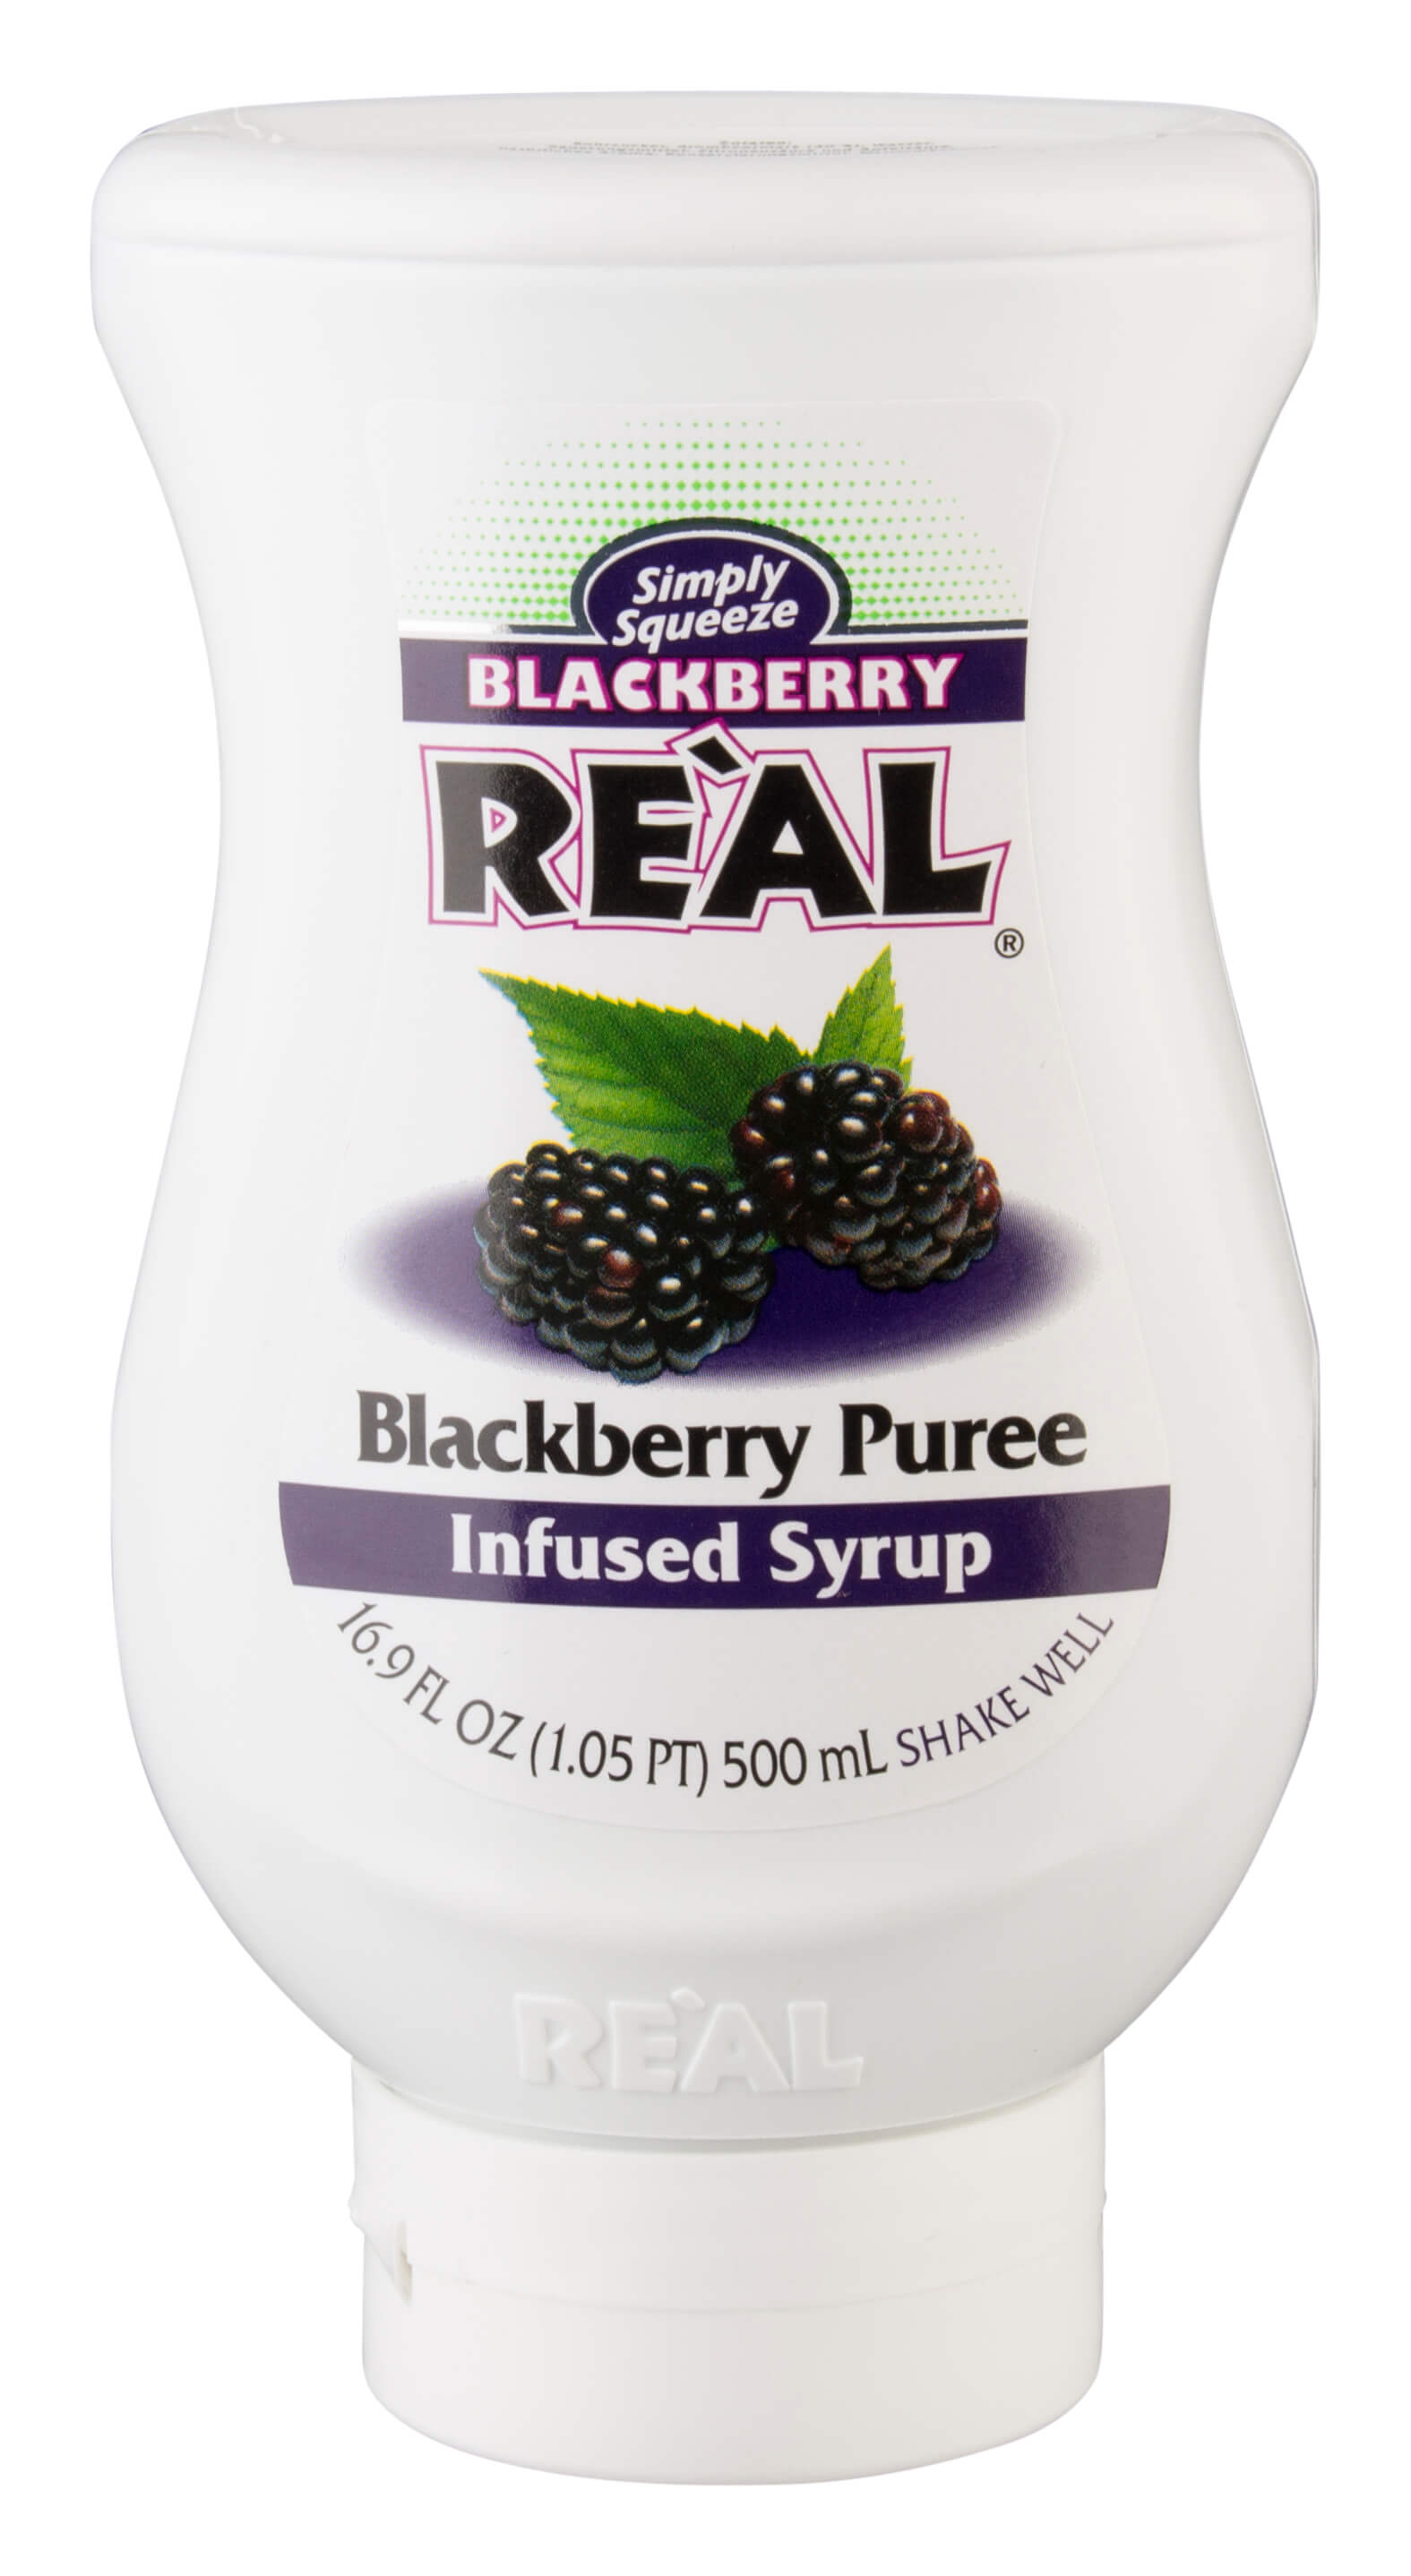 Blackberry Real - blackberry syrup (500ml)